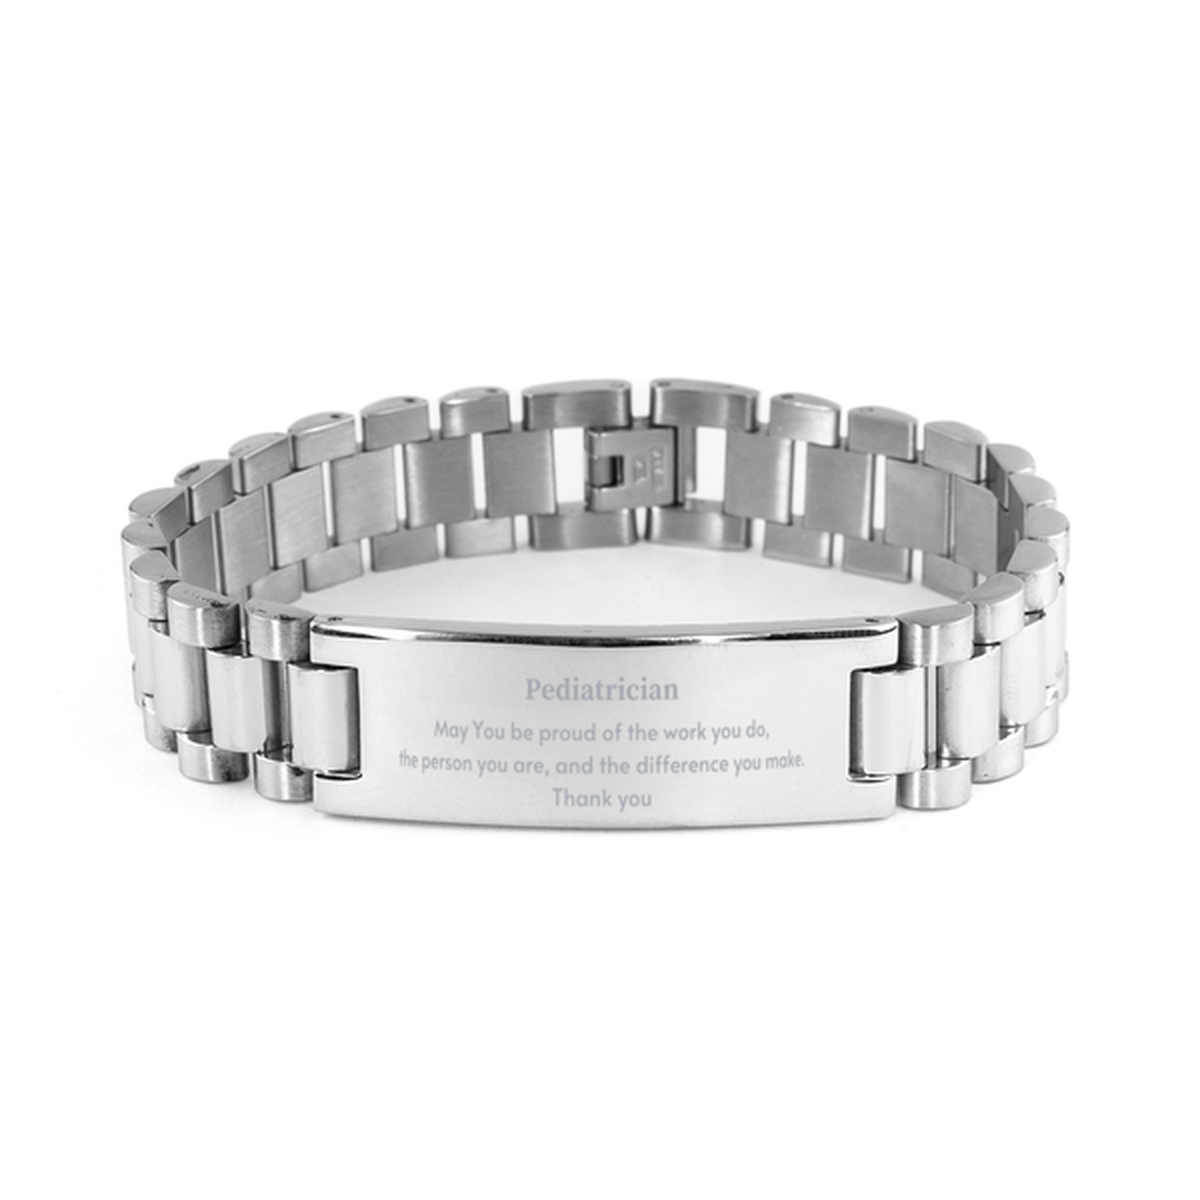 Heartwarming Ladder Stainless Steel Bracelet Retirement Coworkers Gifts for Pediatrician, Pediatrician May You be proud of the work you do, the person you are Gifts for Boss Men Women Friends